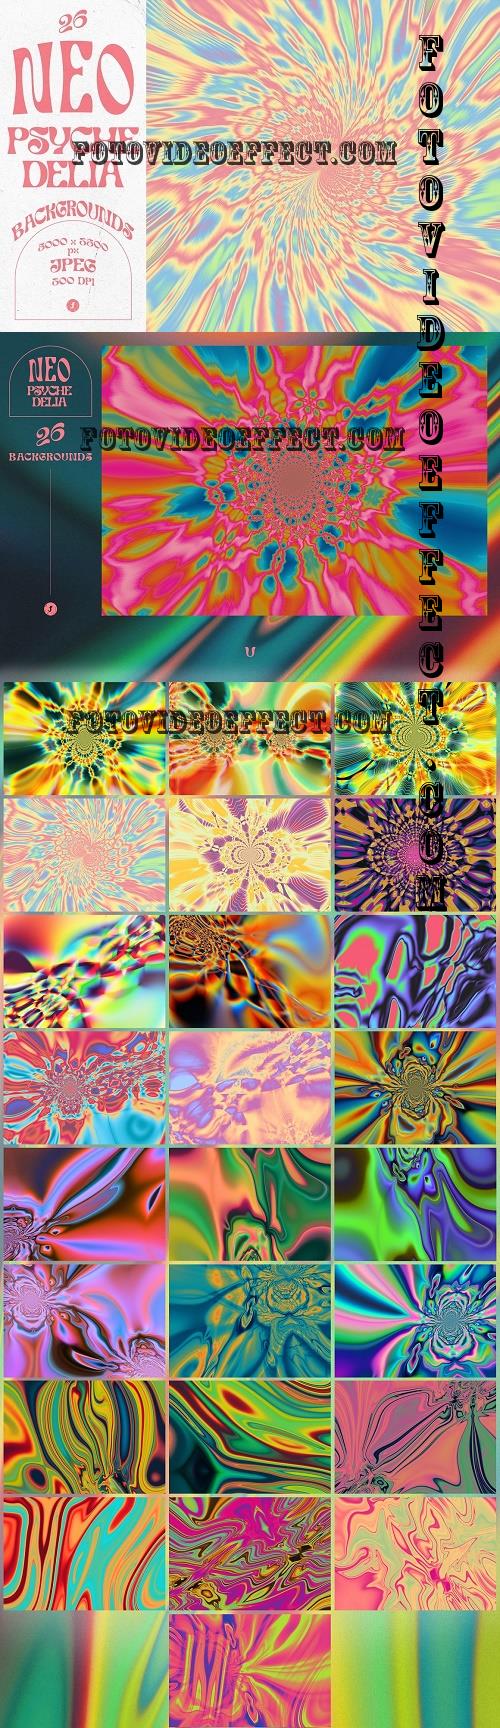 Neo-Psychedelia Backgrounds - 10243477